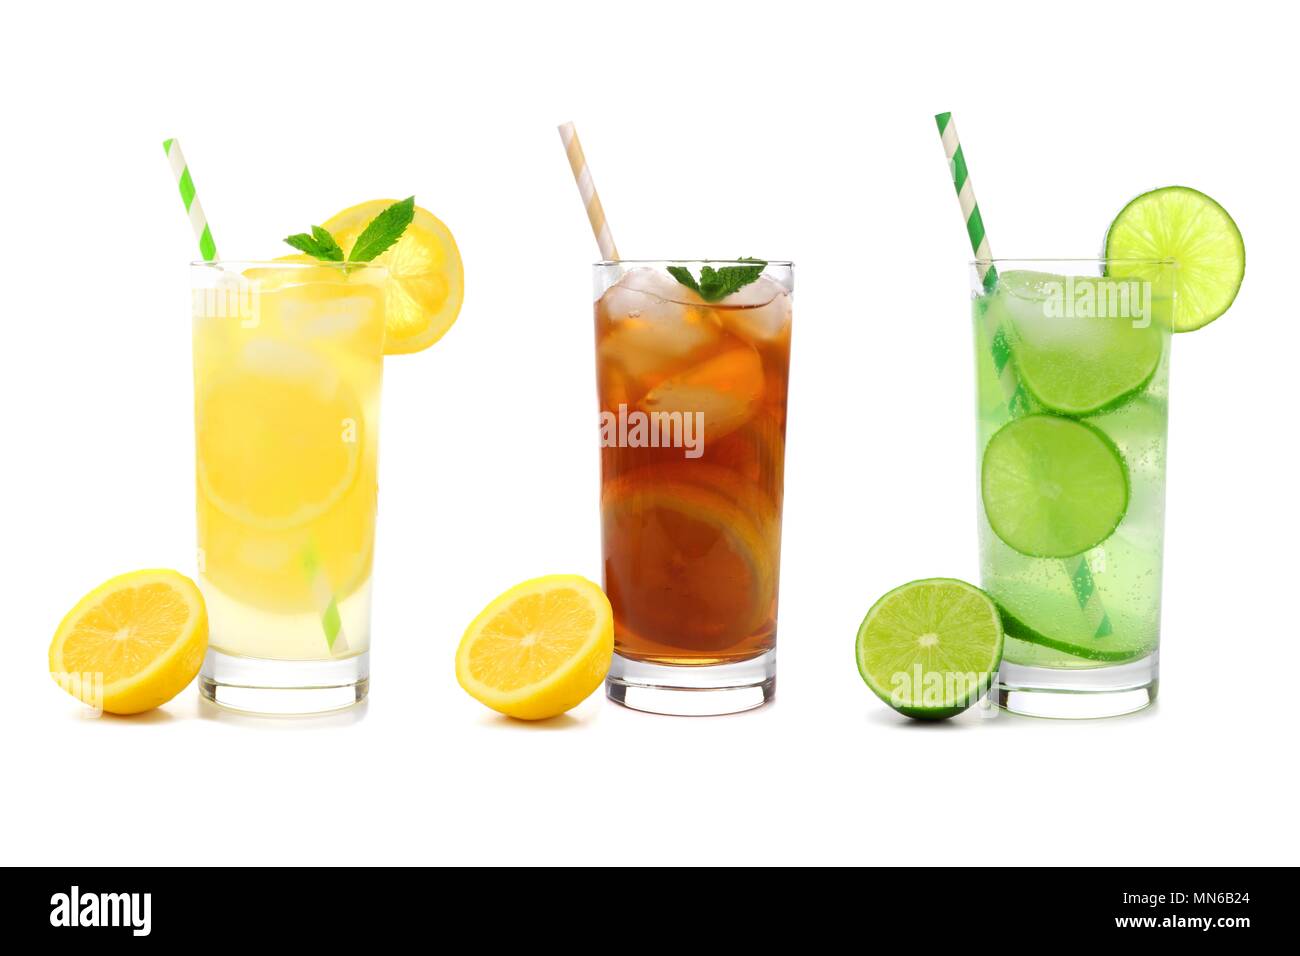 Three glasses of summer lemonade, iced tea, and limeade drinks with straws isolated on a white background Stock Photo